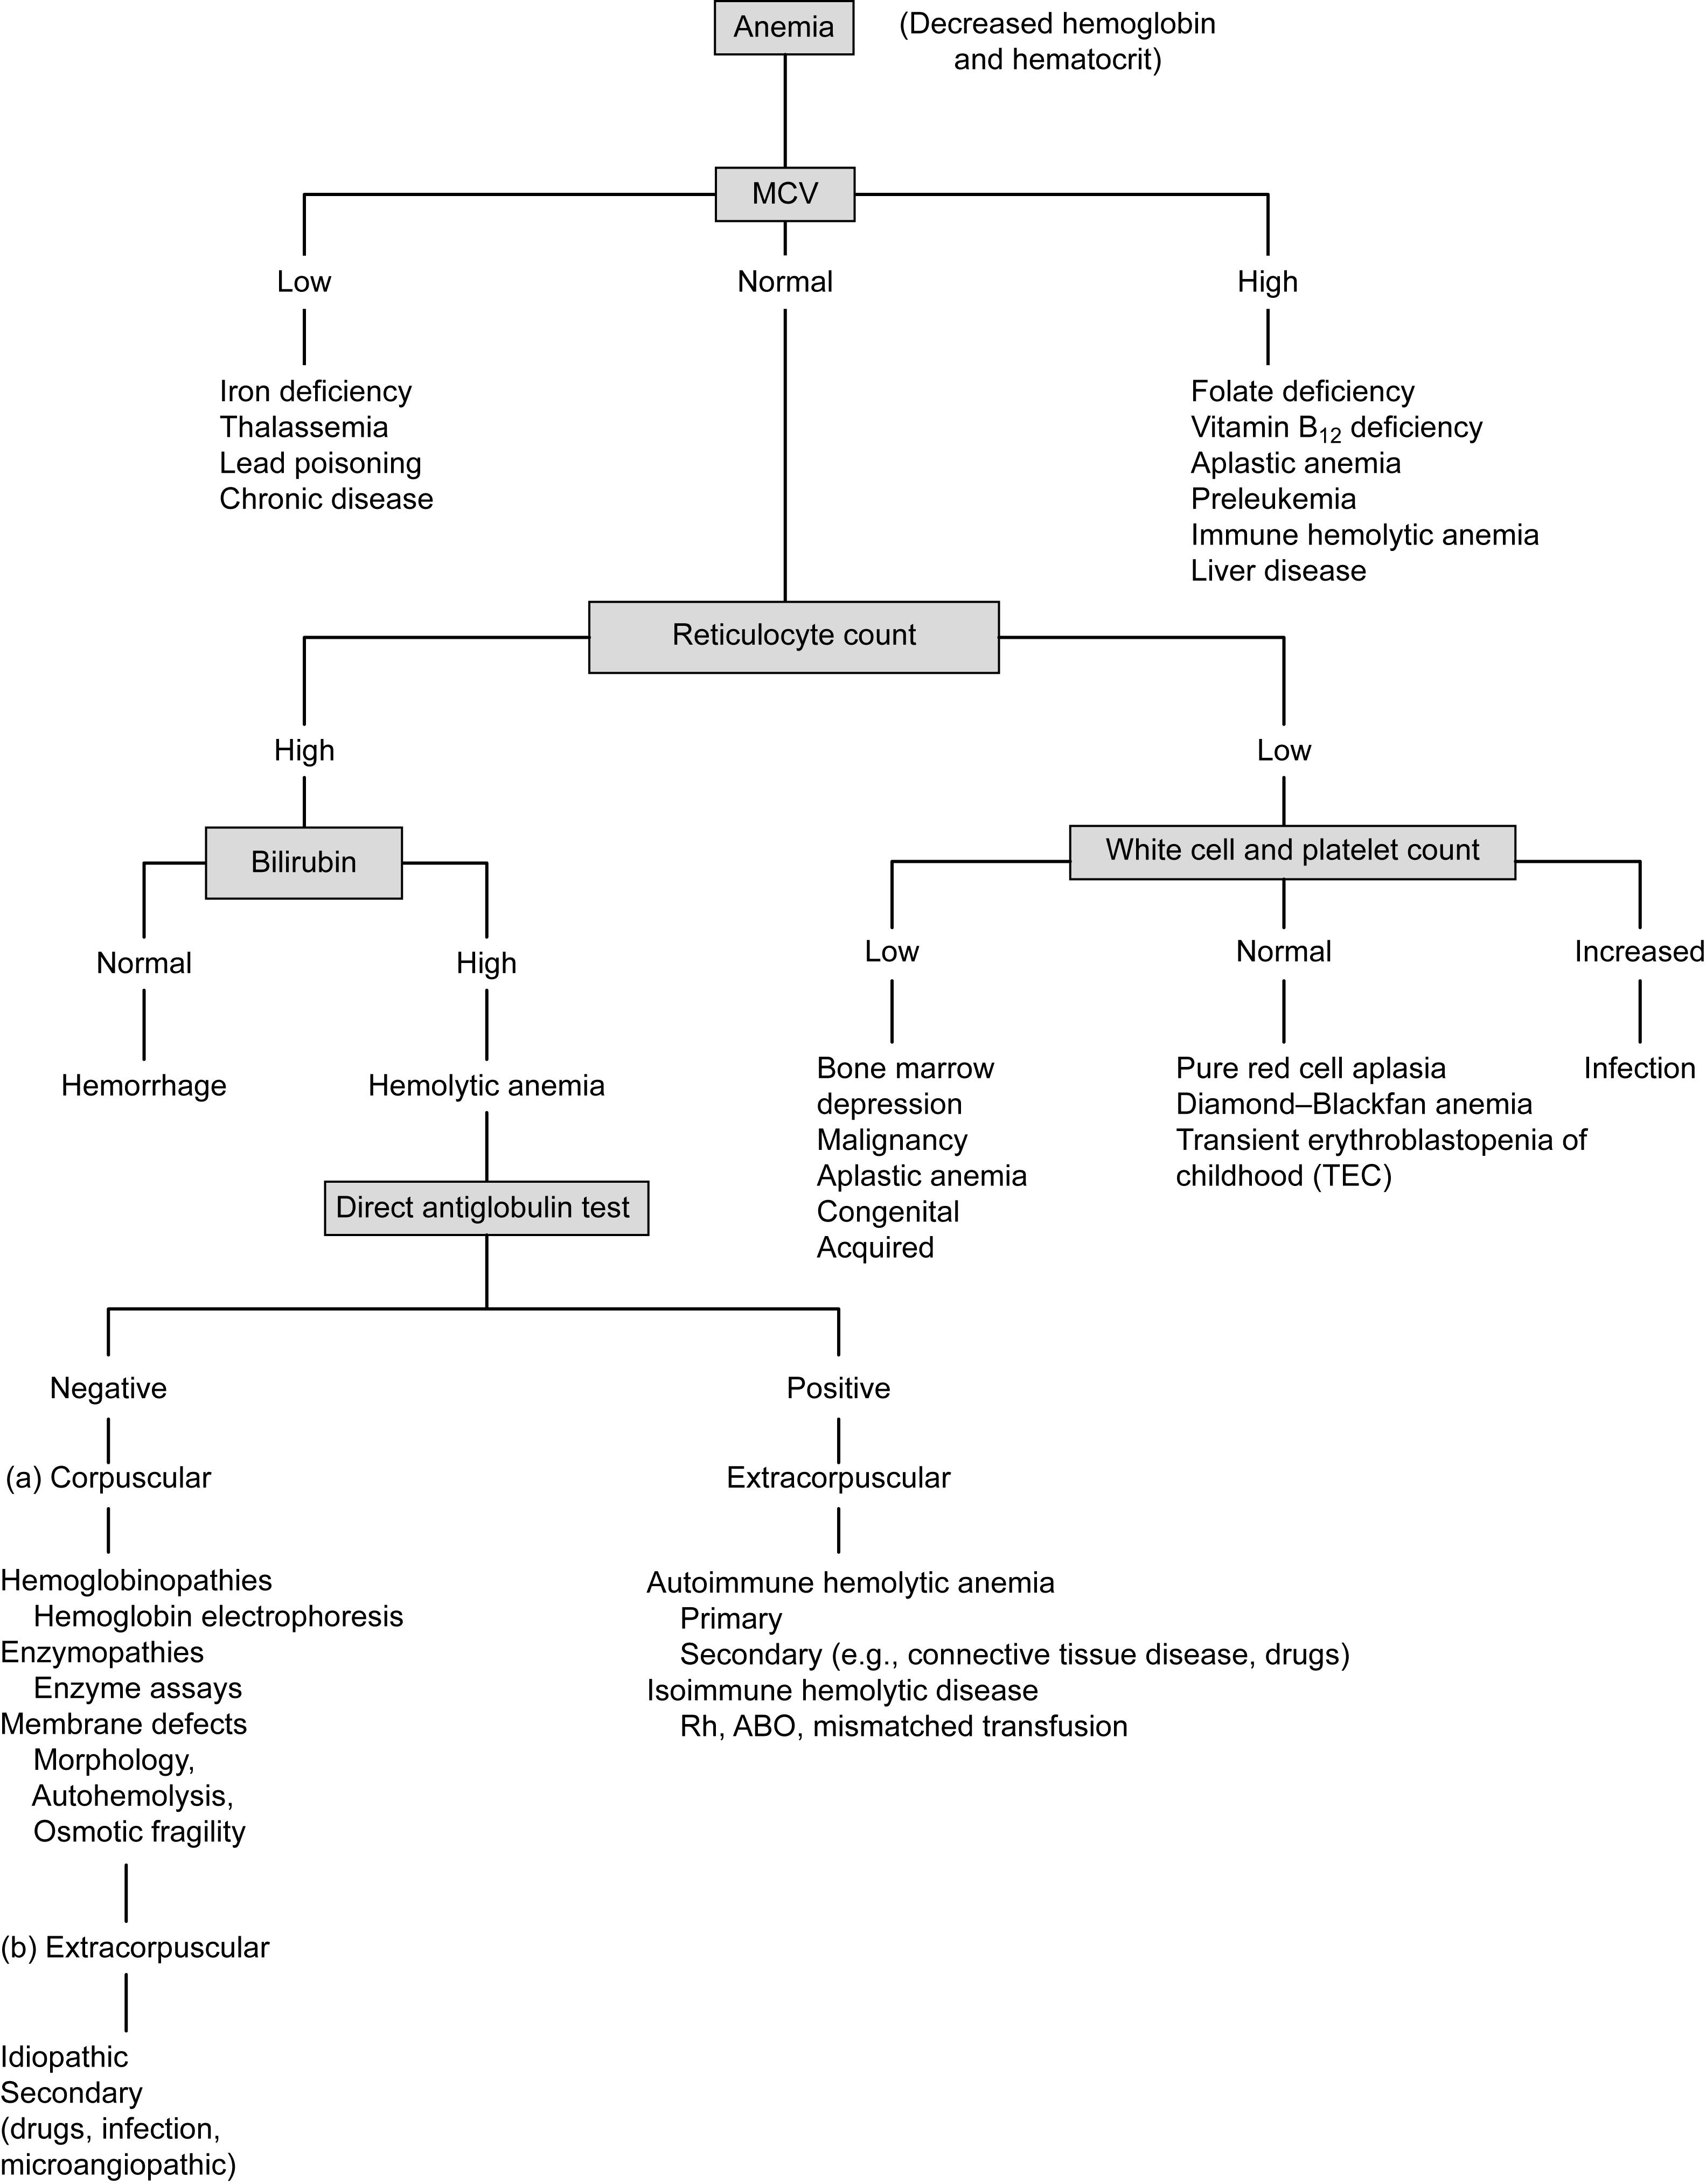 Figure 3.2, Approach to the diagnosis of anemia by MCV and reticulocyte count.